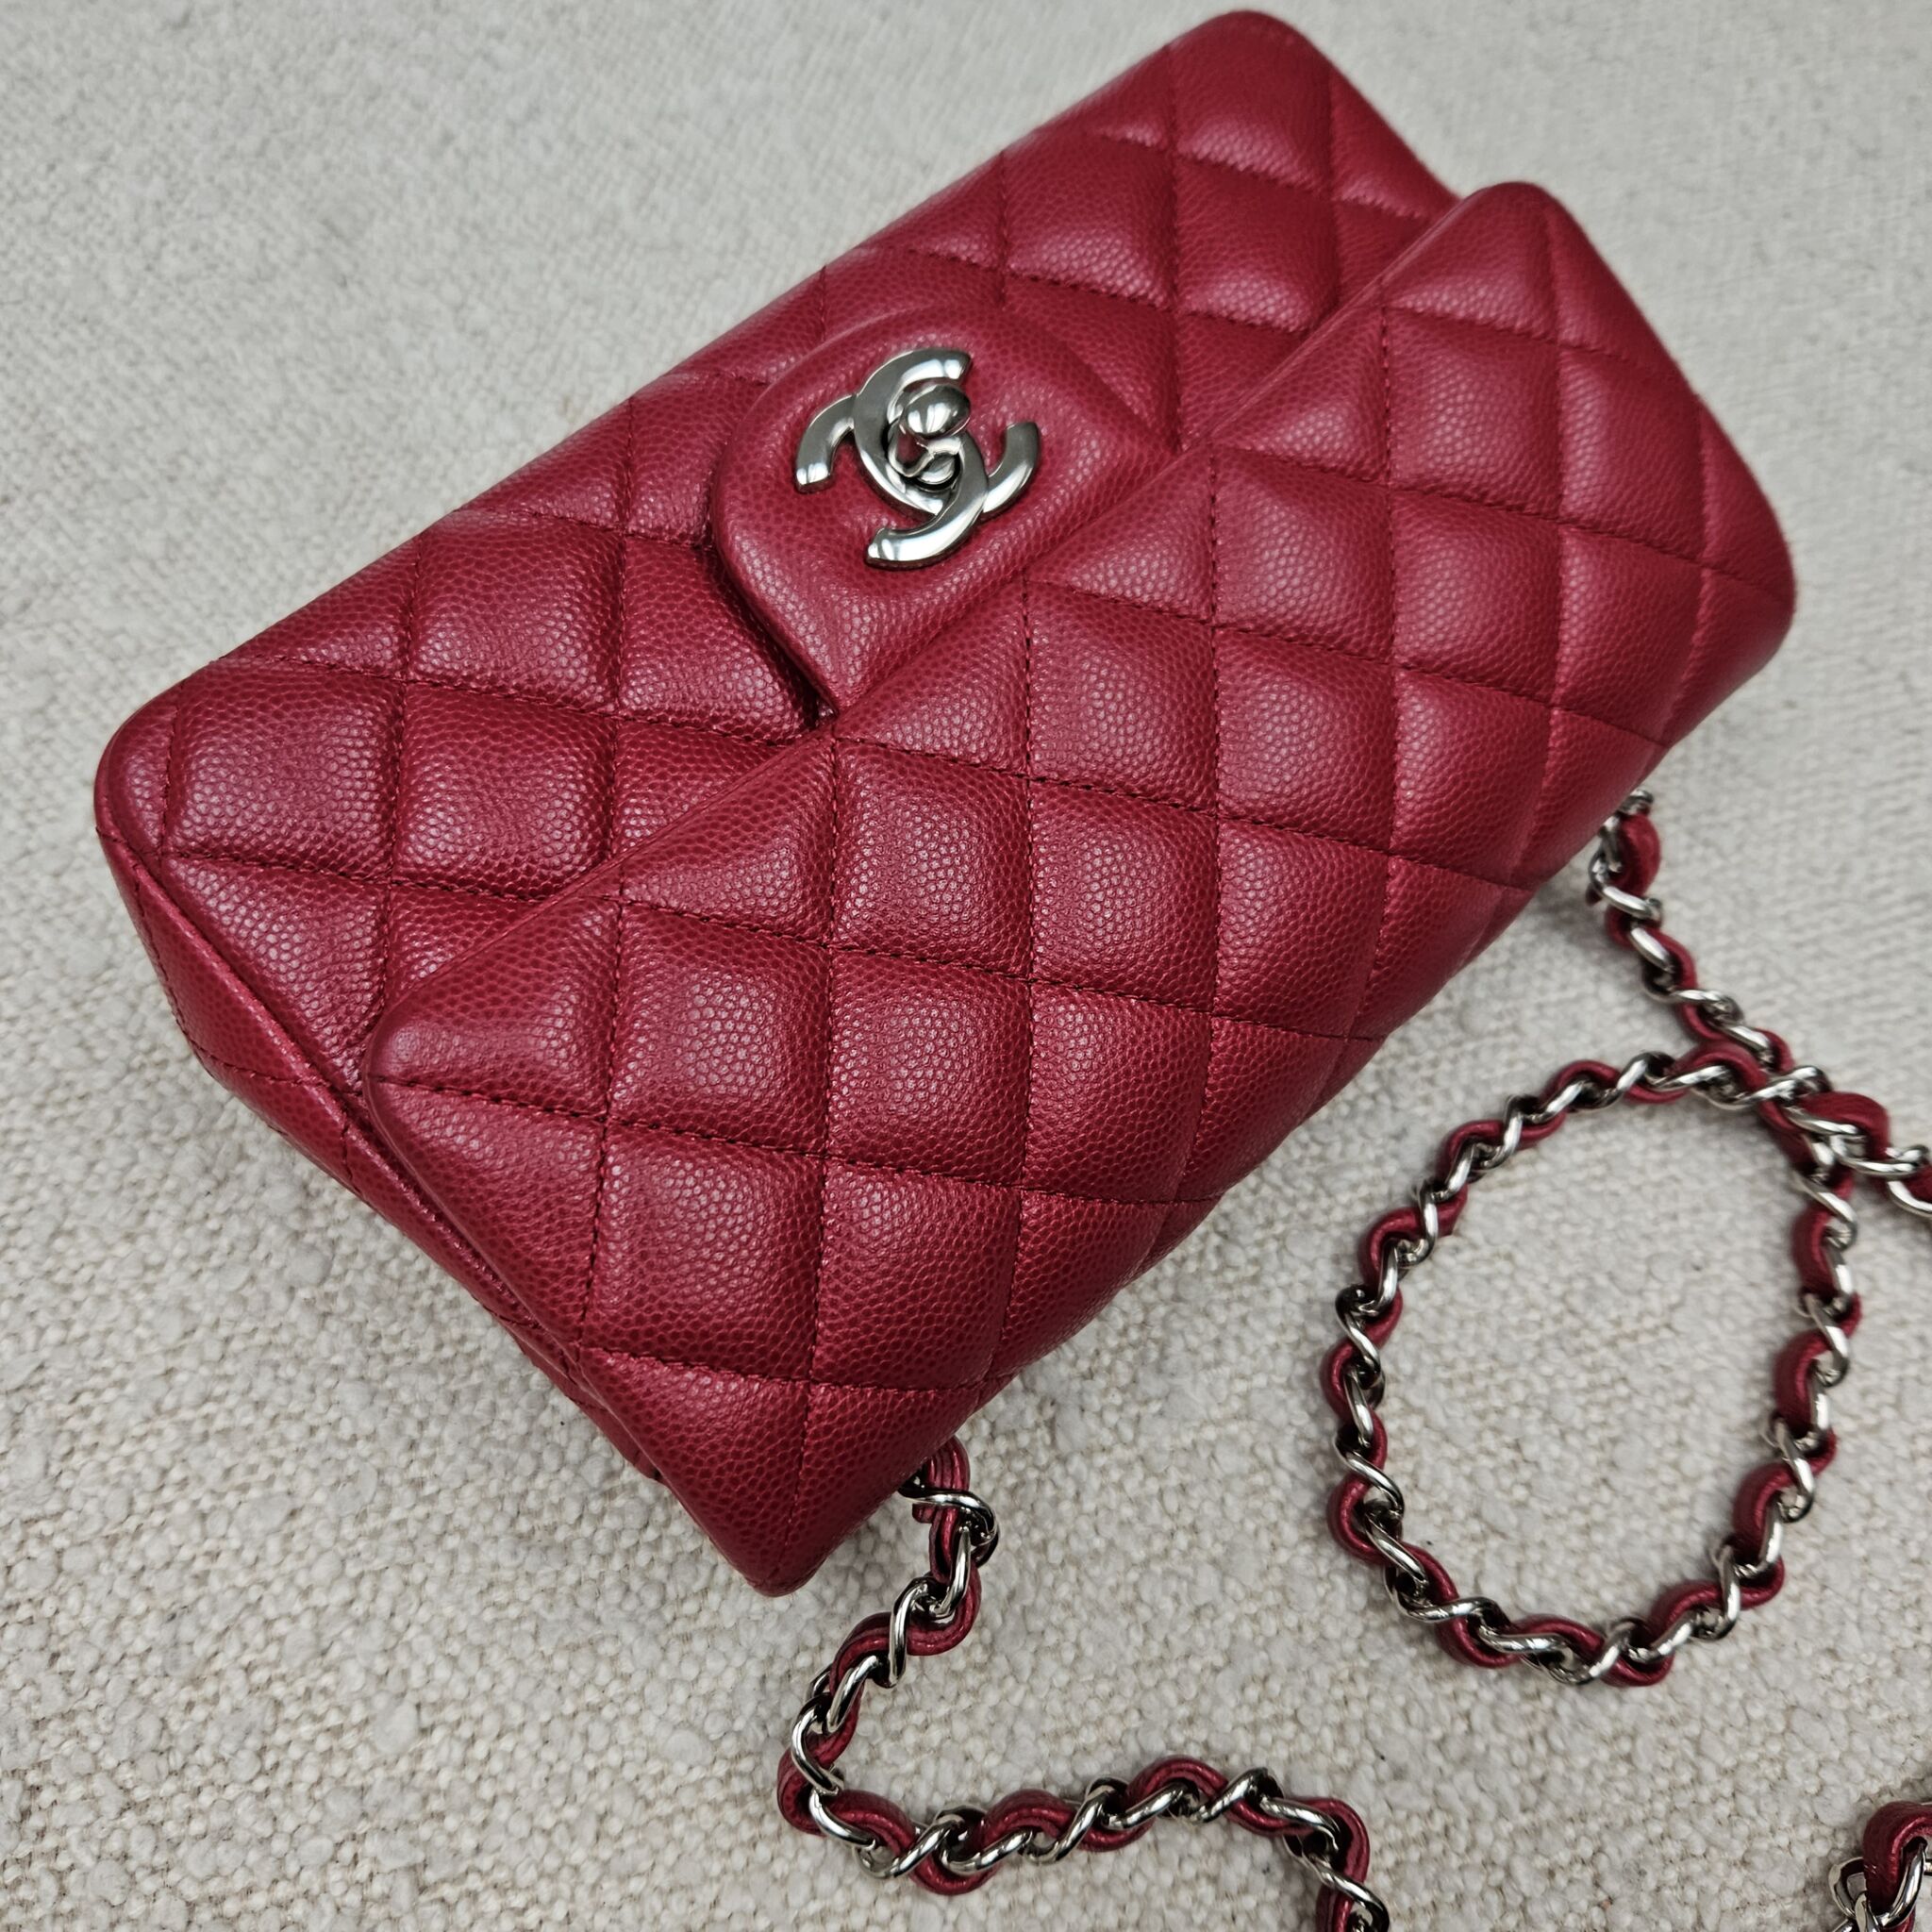 red small chanel bag